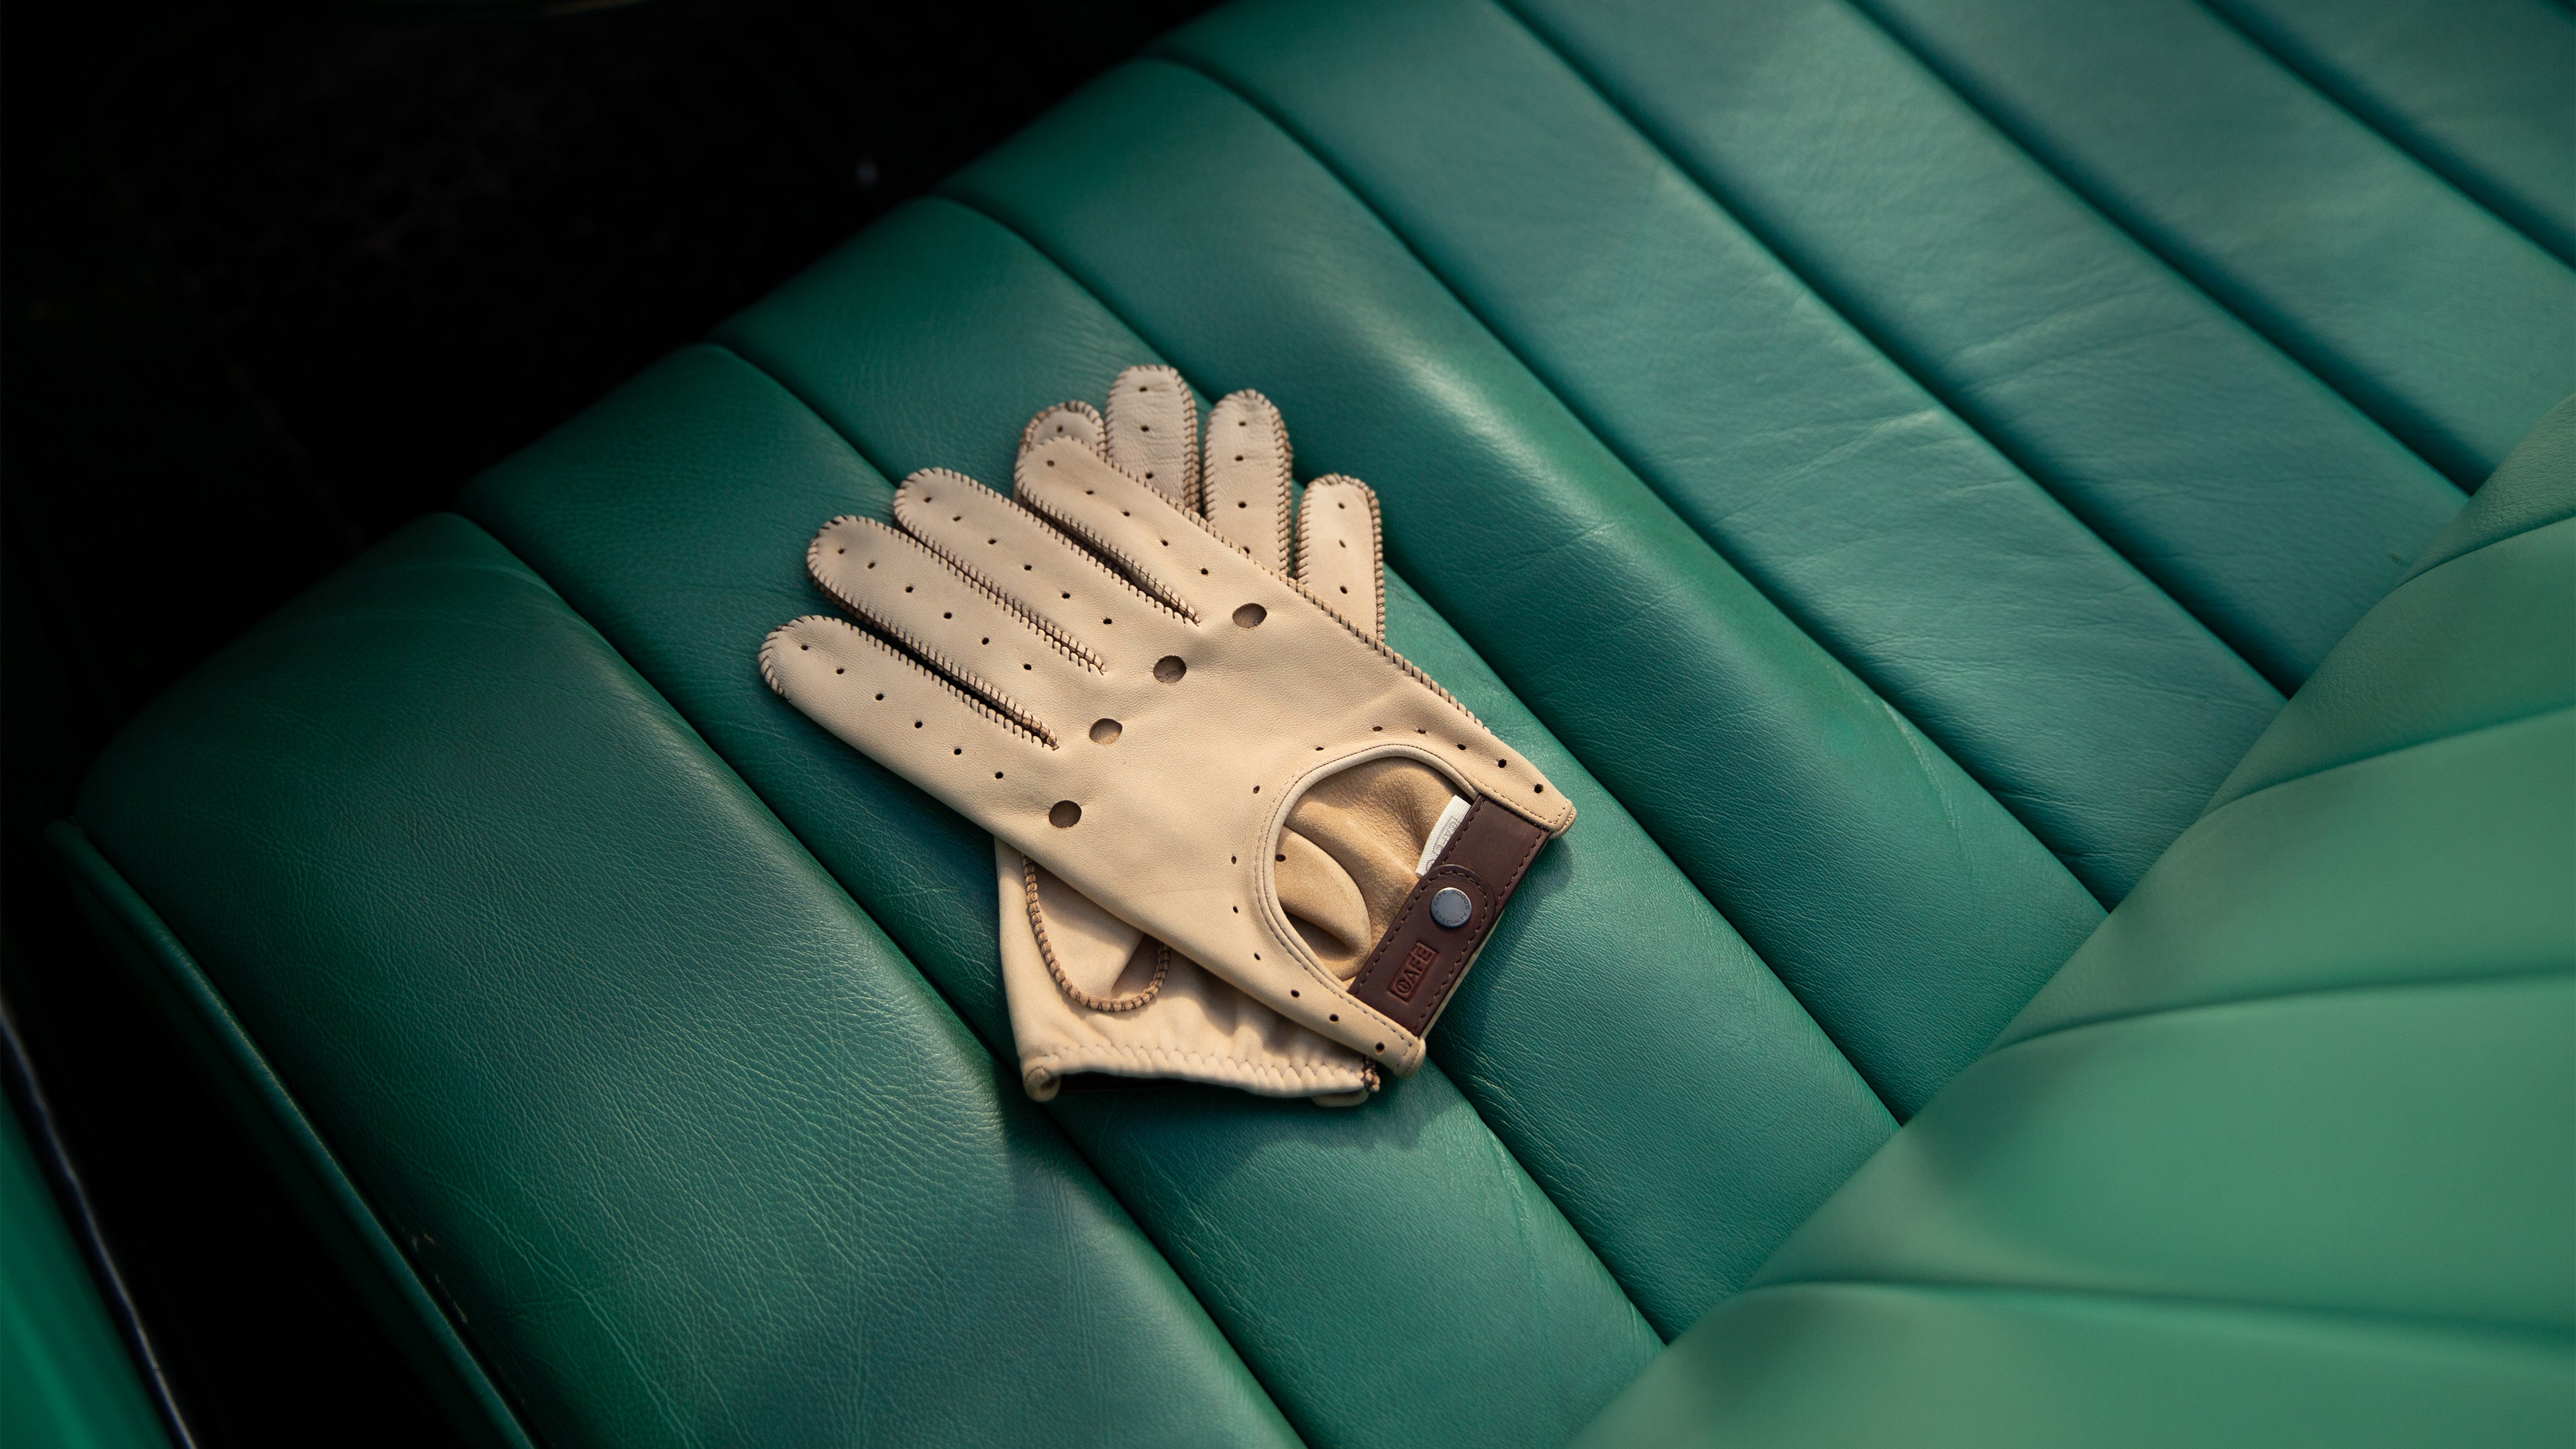 Slip into something special with Café Leather’s new suede driving gloves